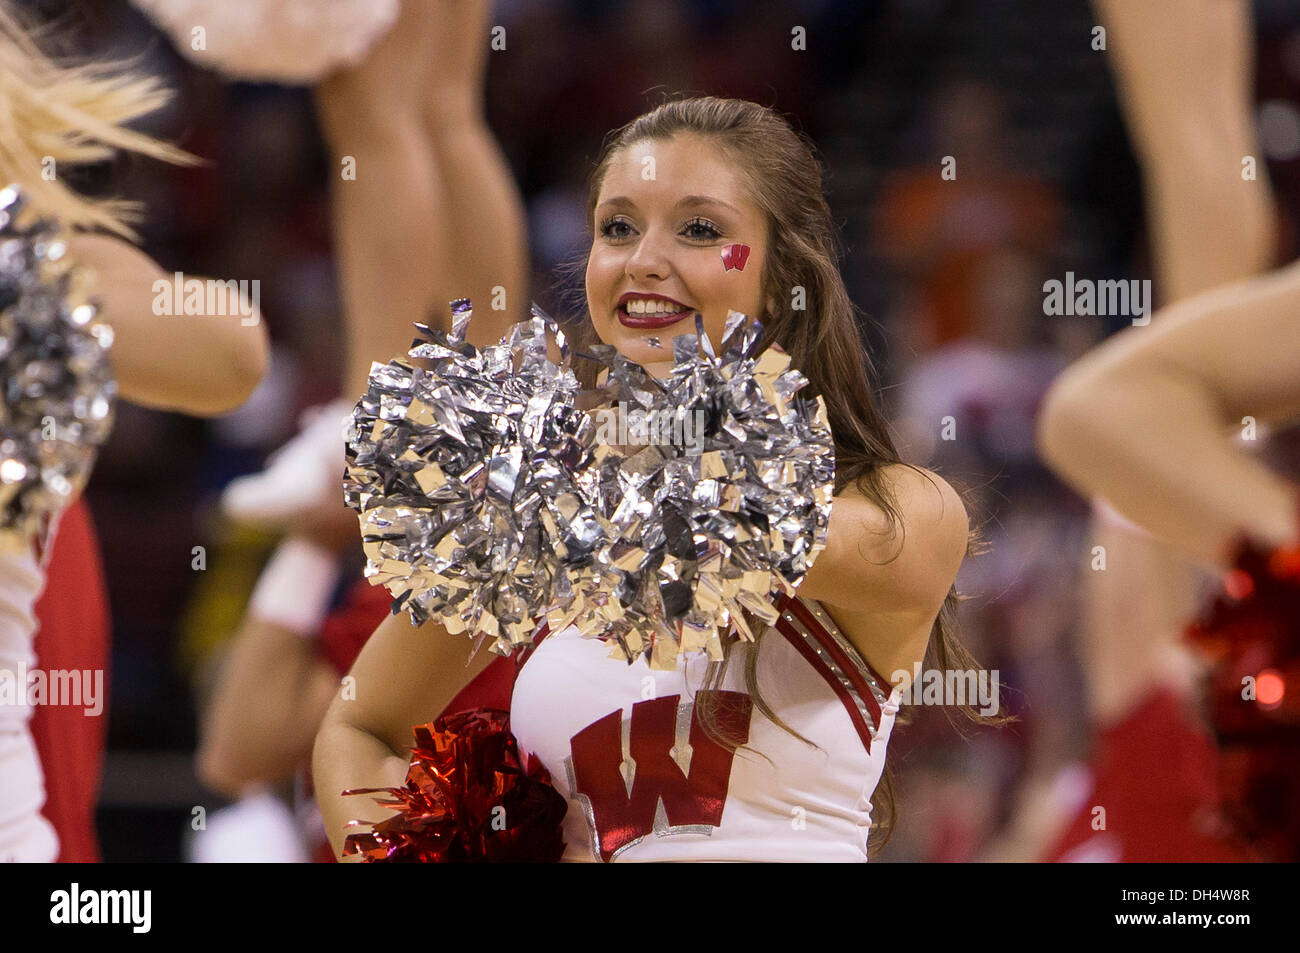 Madison, Wisconsin, USA. 30th Oct, 2013. October 30, 2013: Wisconsin Badgers cheerleader entertains the crowd during a timeout of the NCAA Exhibition Basketball game between UW-Platteville Pioneers and the Wisconsin Badgers. The Badgers defeated the Pioneers 80-51 at the Kohl Center in Madison, WI. John Fisher/CSM/Alamy Live News Stock Photo